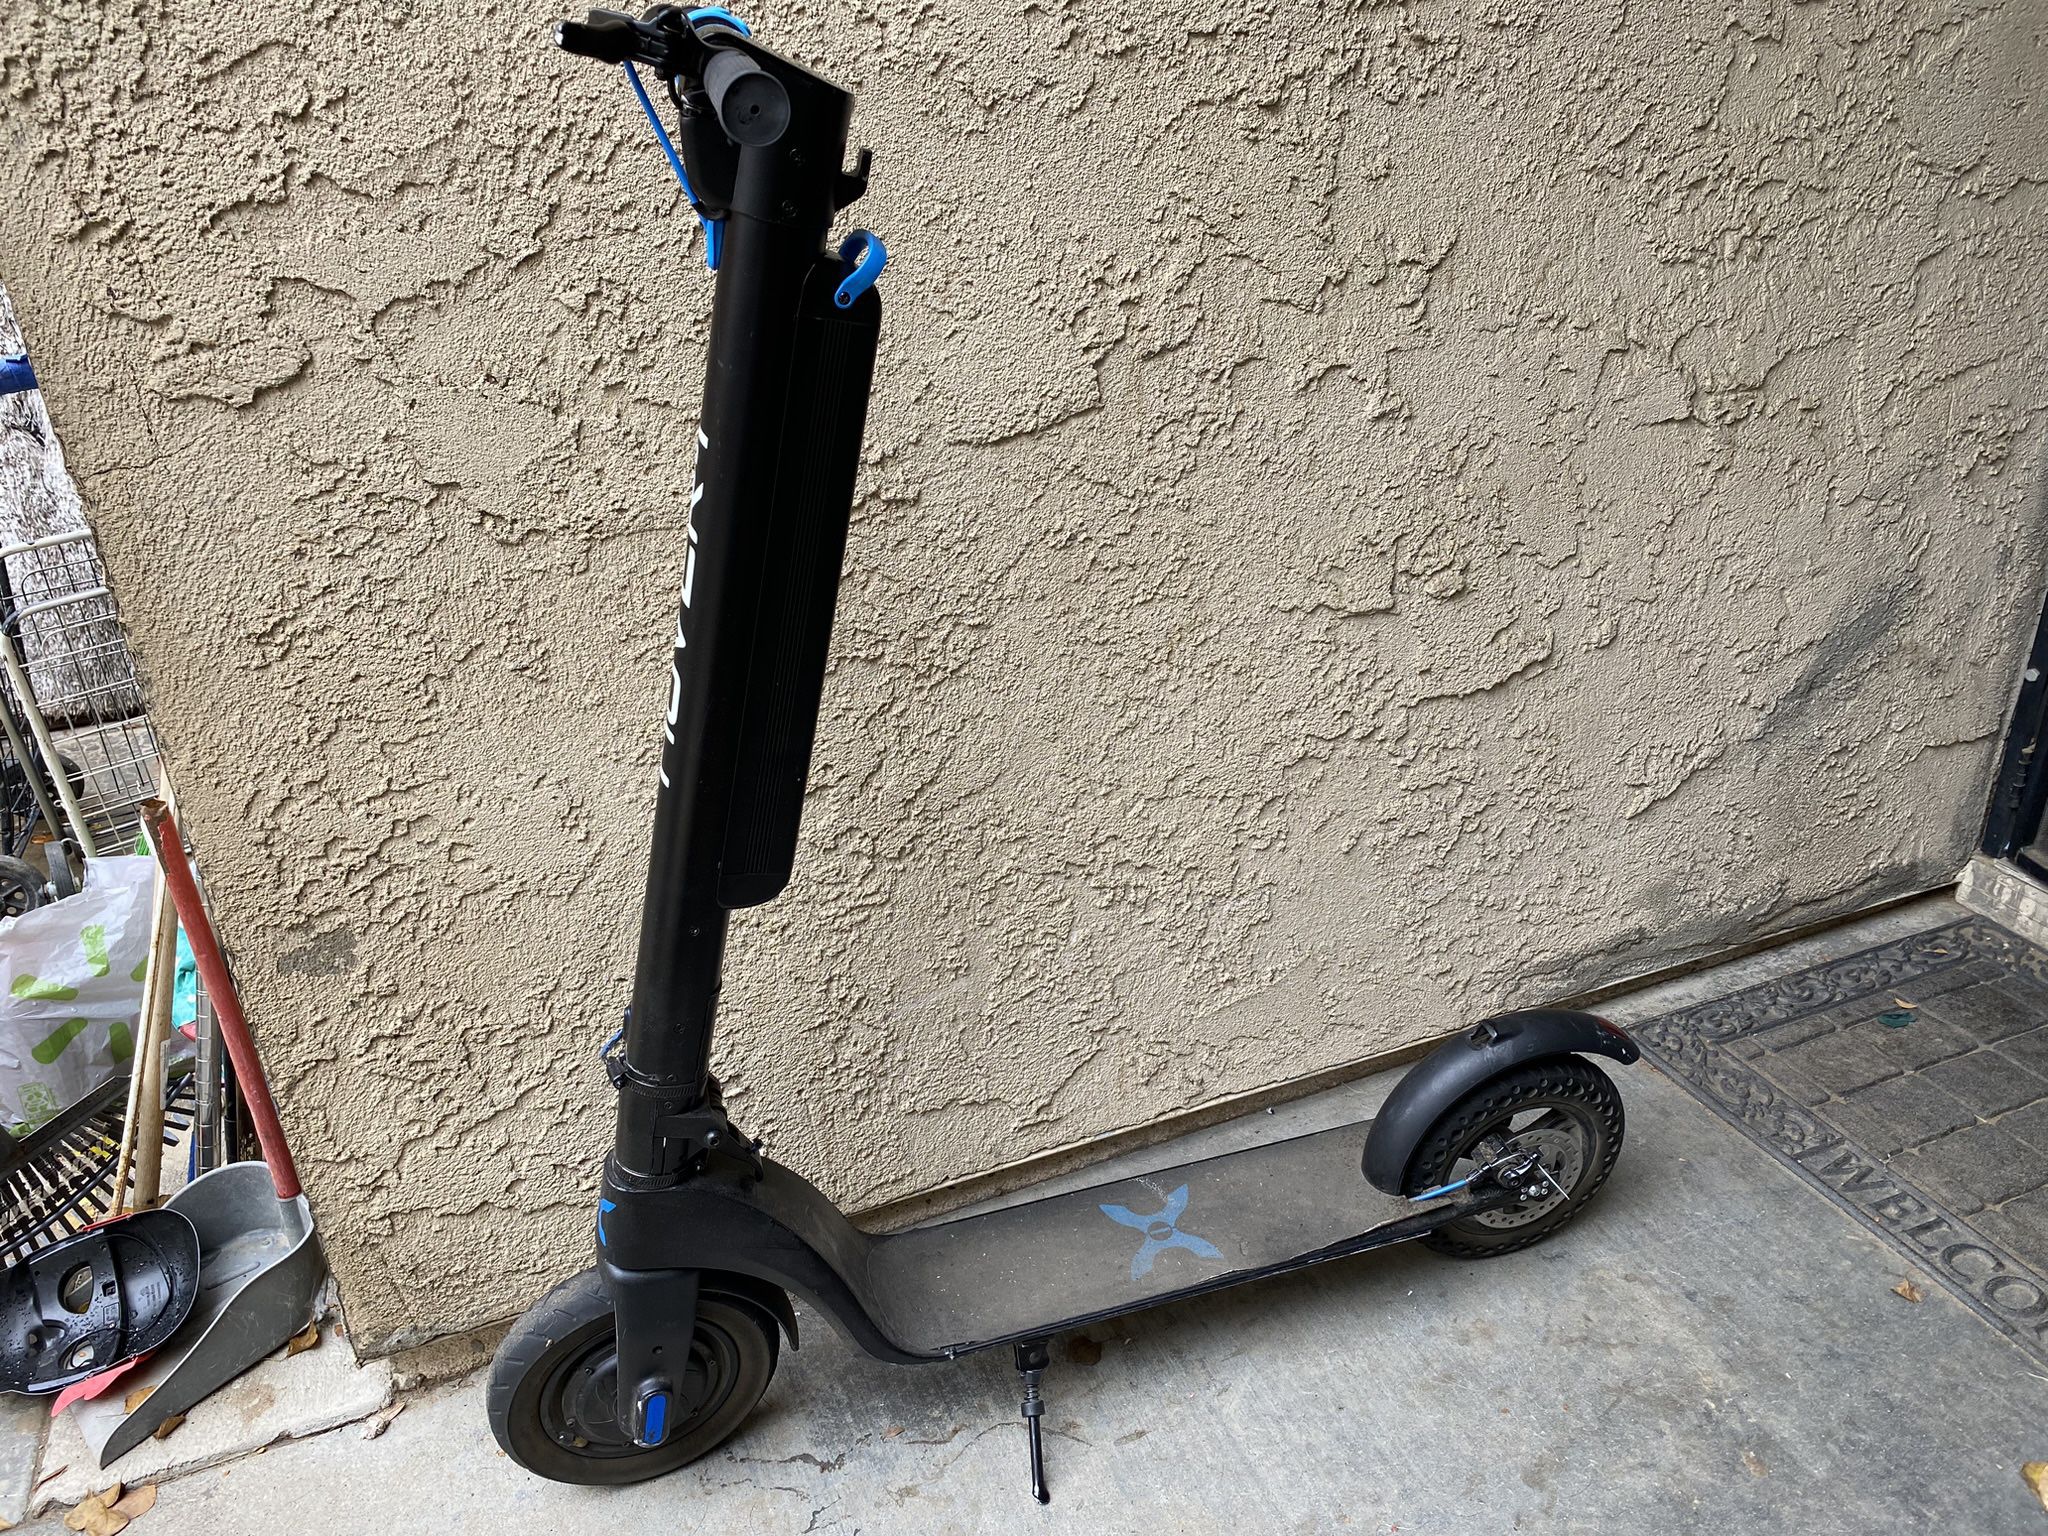 Hover-1 Highlander Pro Electric Scooter w/ Charger And Solid Rubber Tire